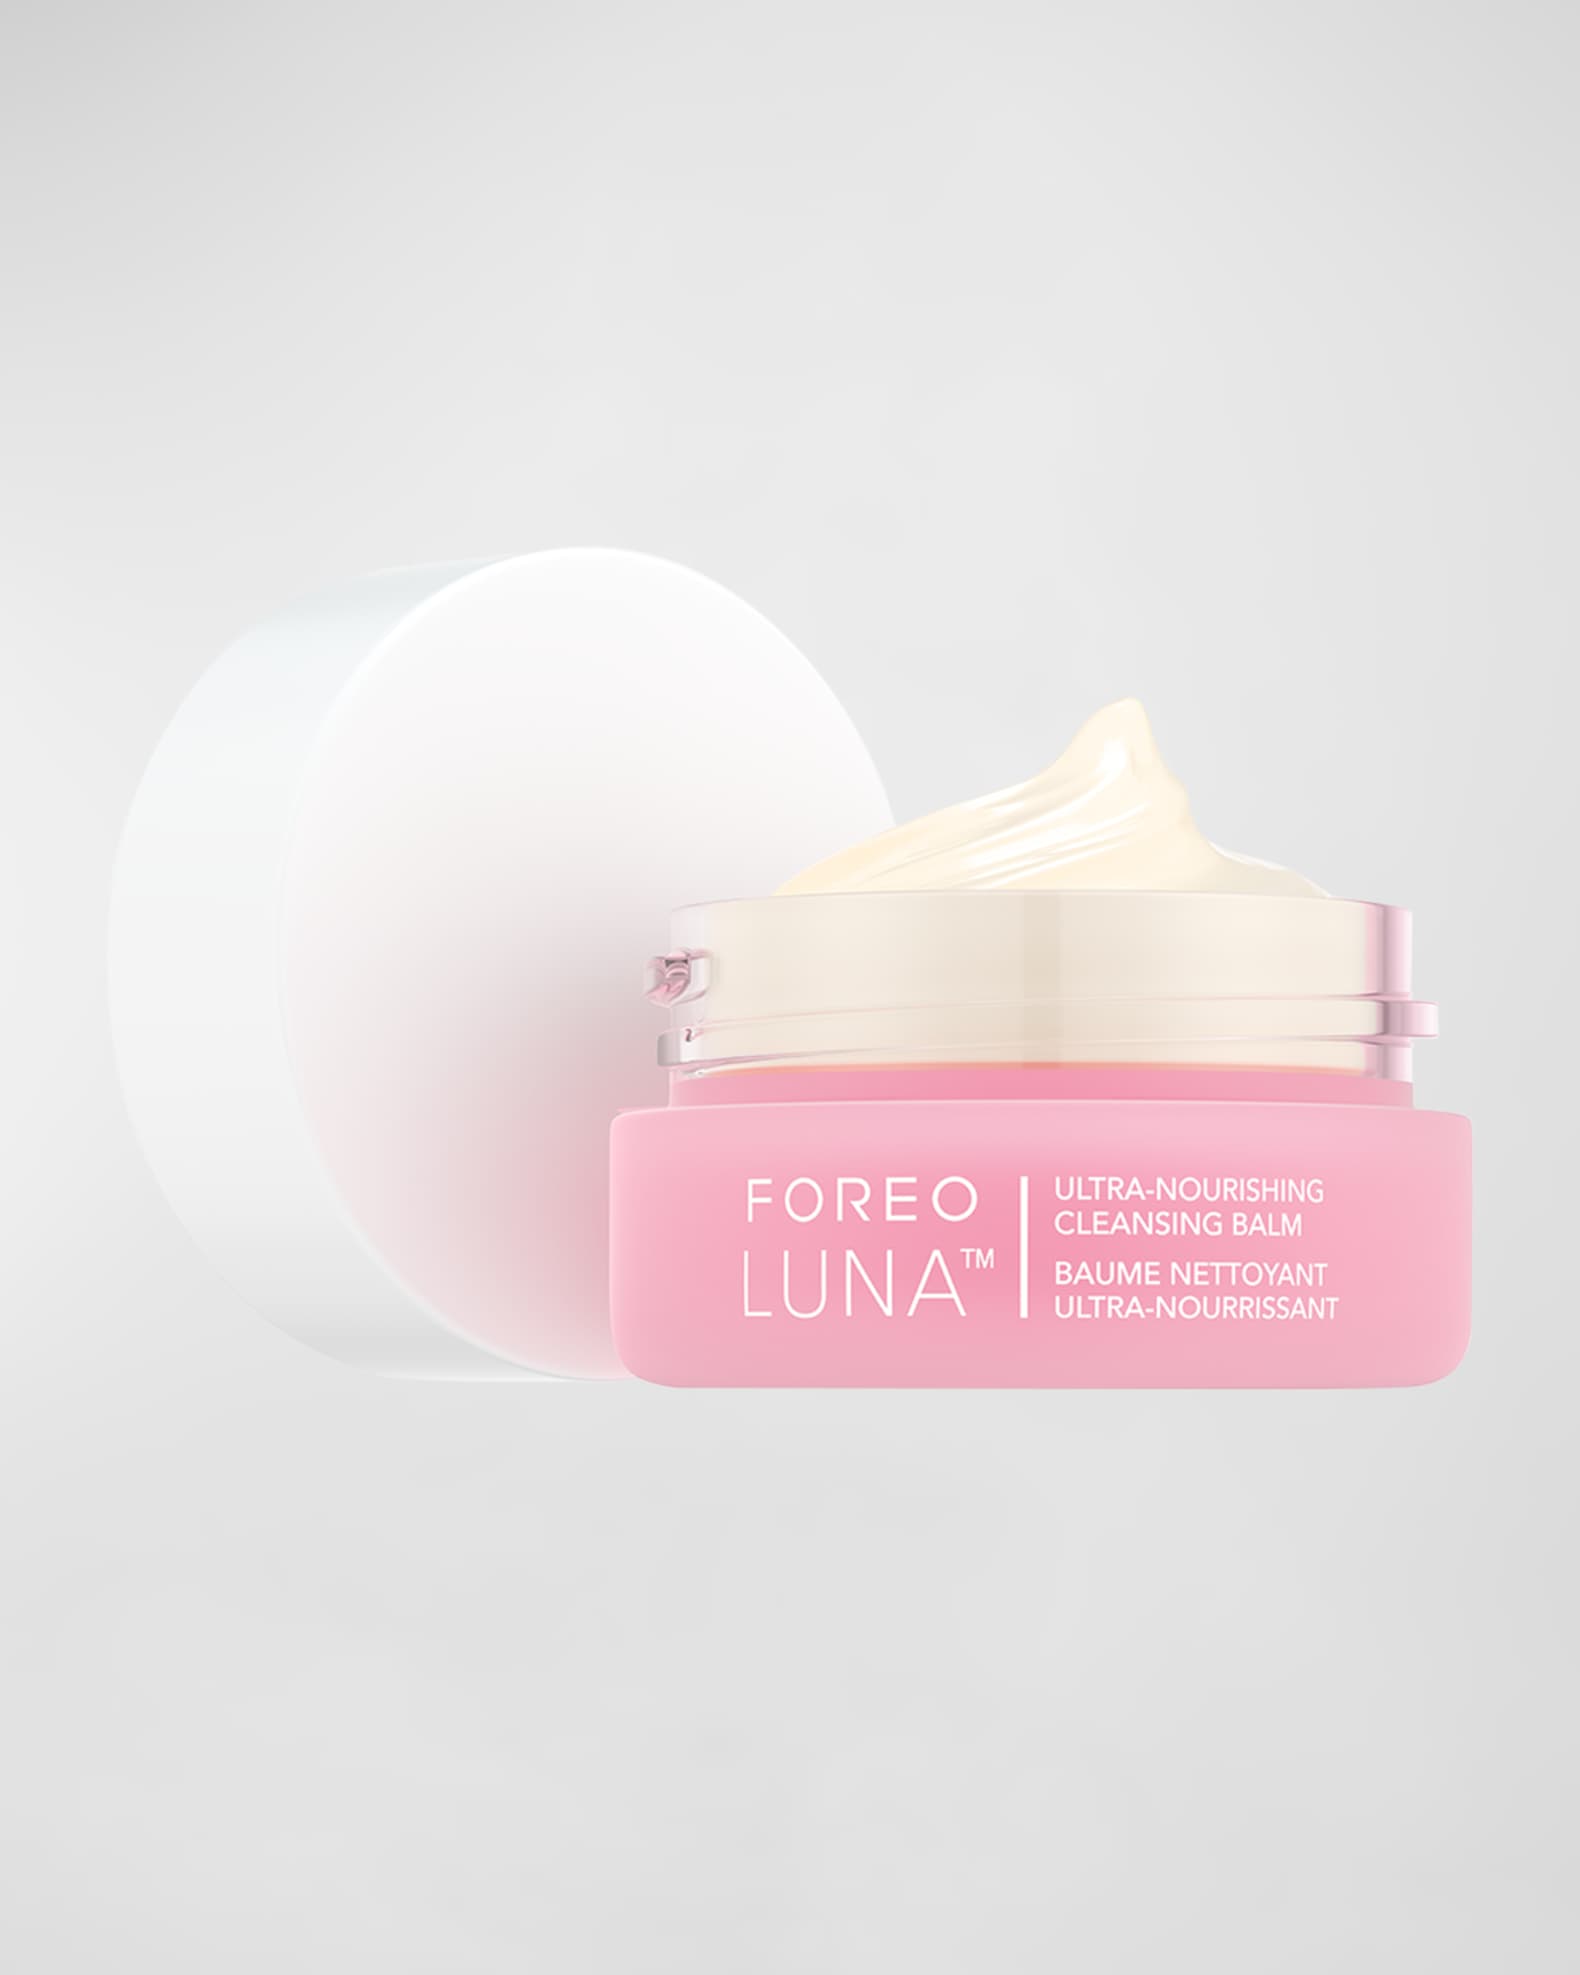 Balm, Ultra with Foreo Yours $250 Cleansing Neiman Order | any Foreo Marcus LUNA Nourishing